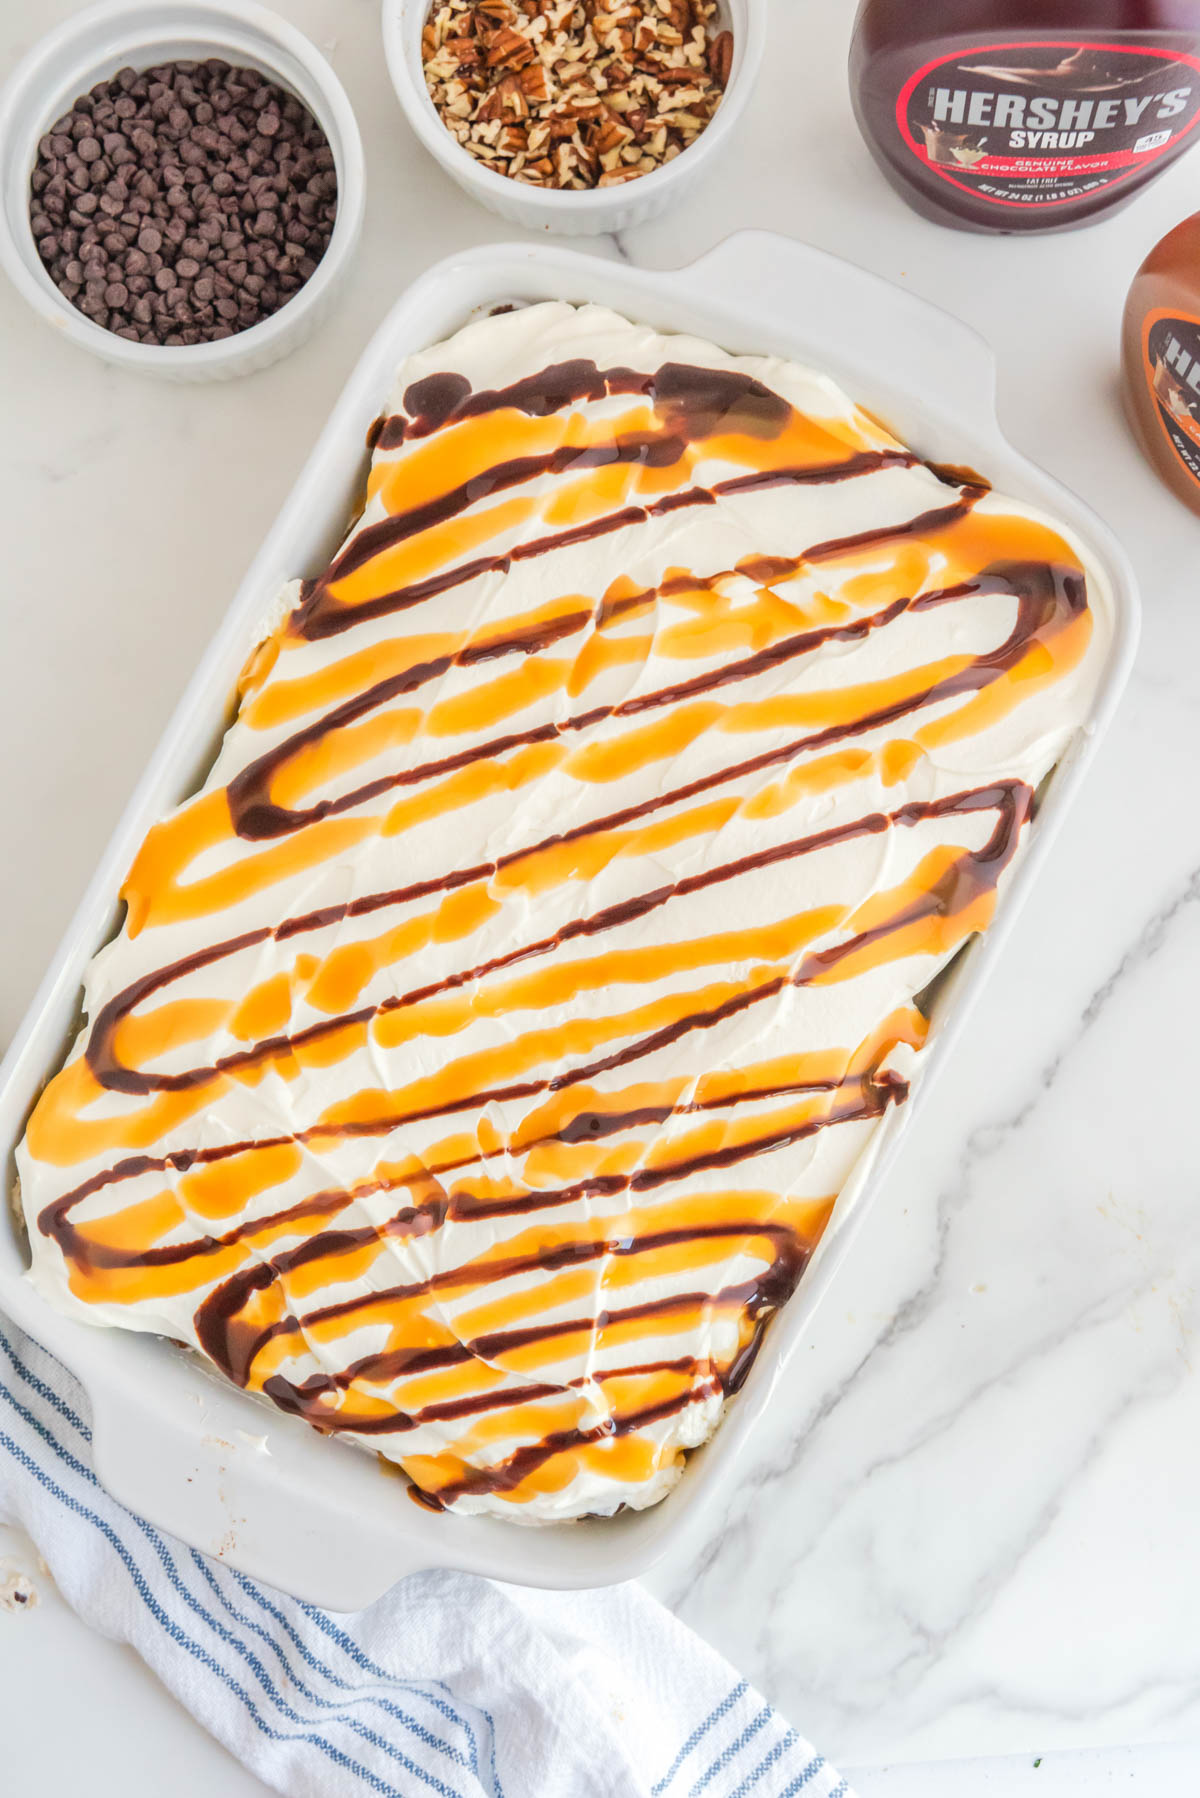 A baking dish with chocolate and caramel sauce drizzled over ice cream sandwich cake